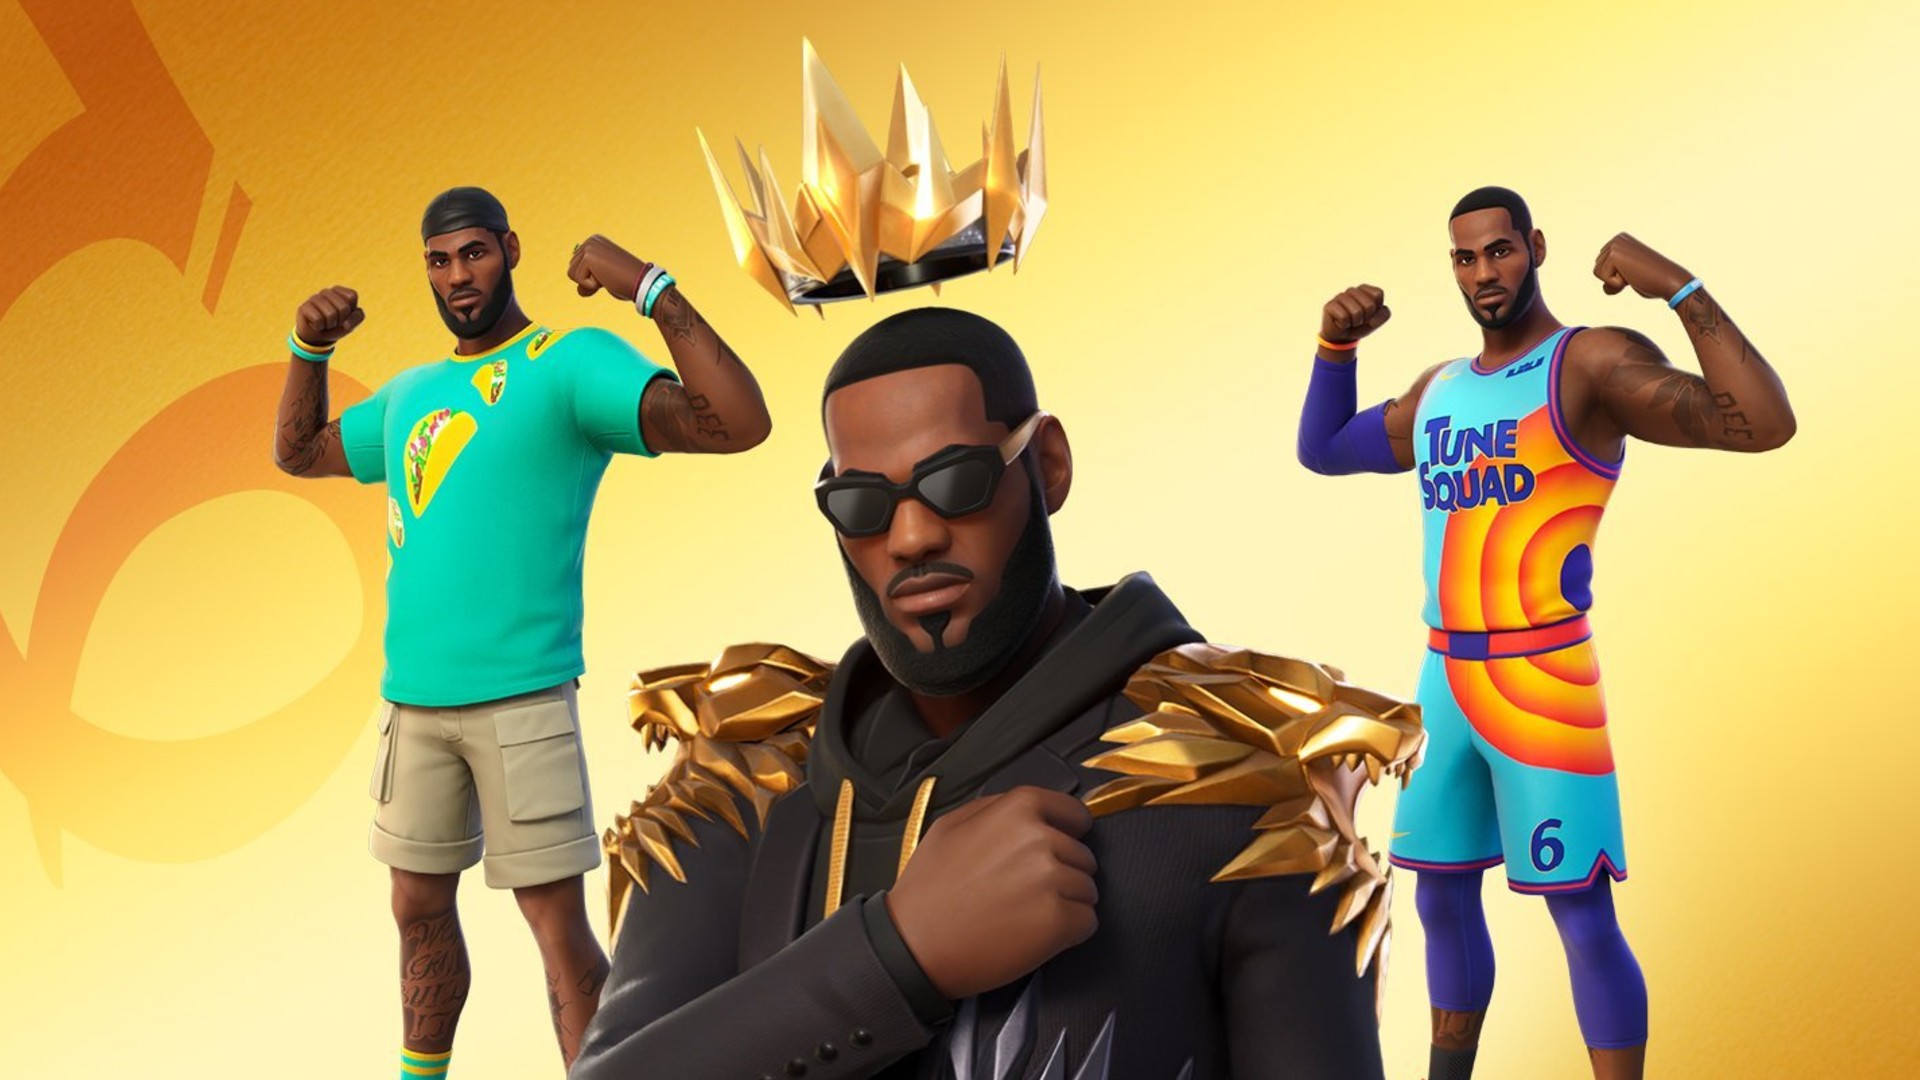 LeBron Fortnite skin: Release date, cosmetics, and everything else we know